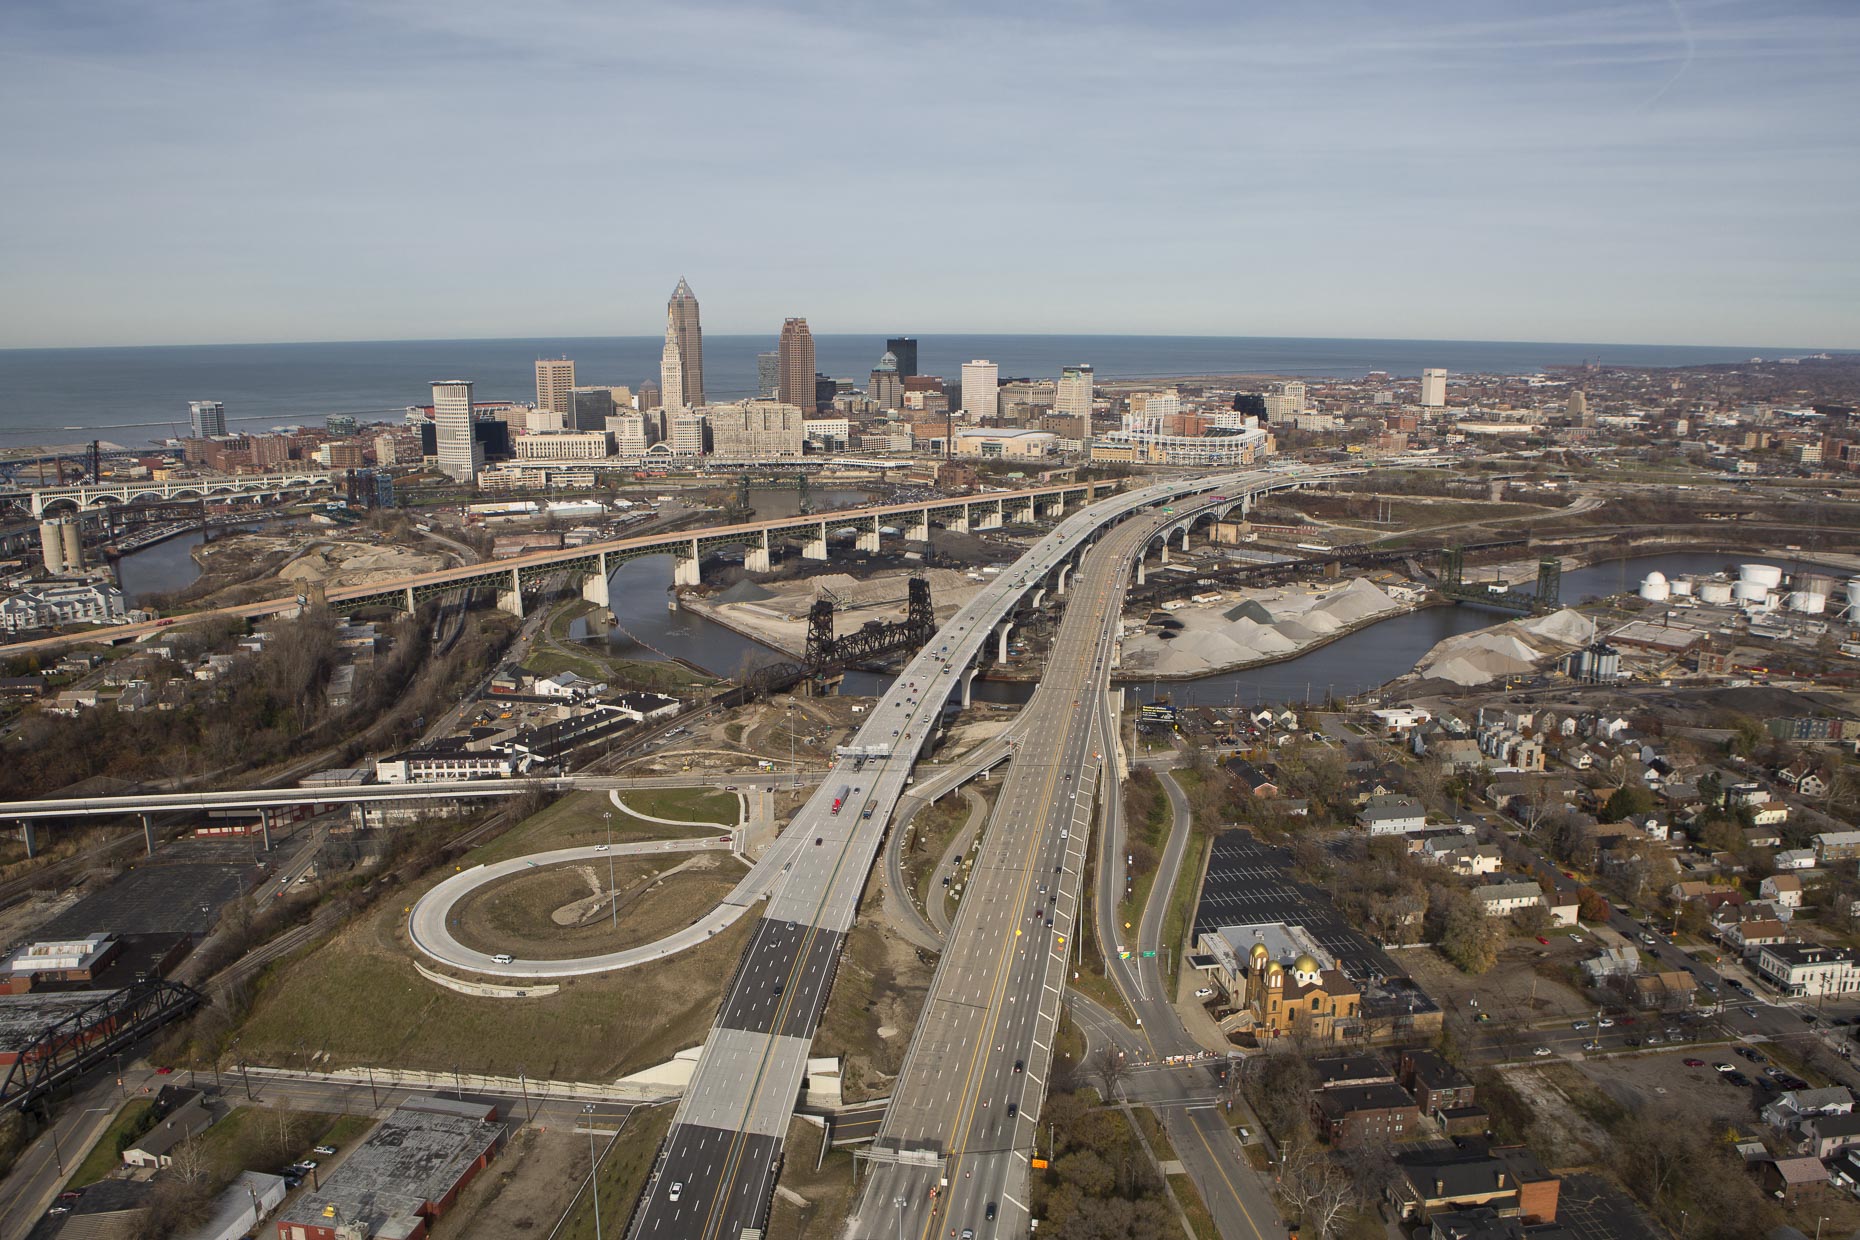 US I-90 Cleveland Innerbelt Bridge by HNTB photographed by Brad Feinknopf based in Columbus, Ohio